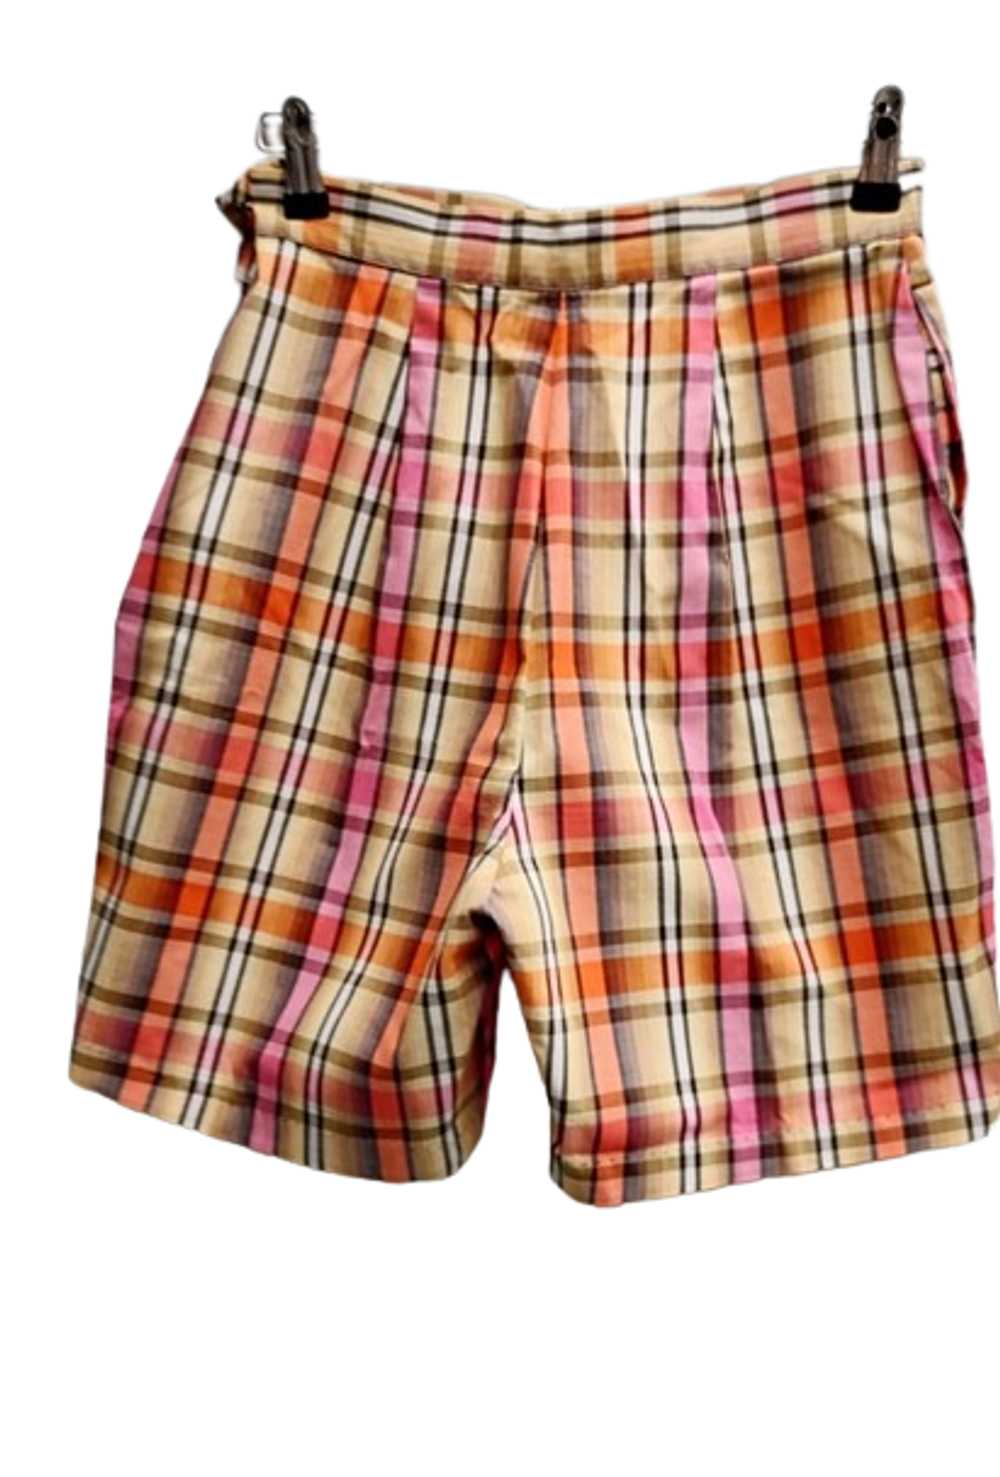 Vintage 1960s Never Worn Plaid Cotton Shorts in B… - image 4